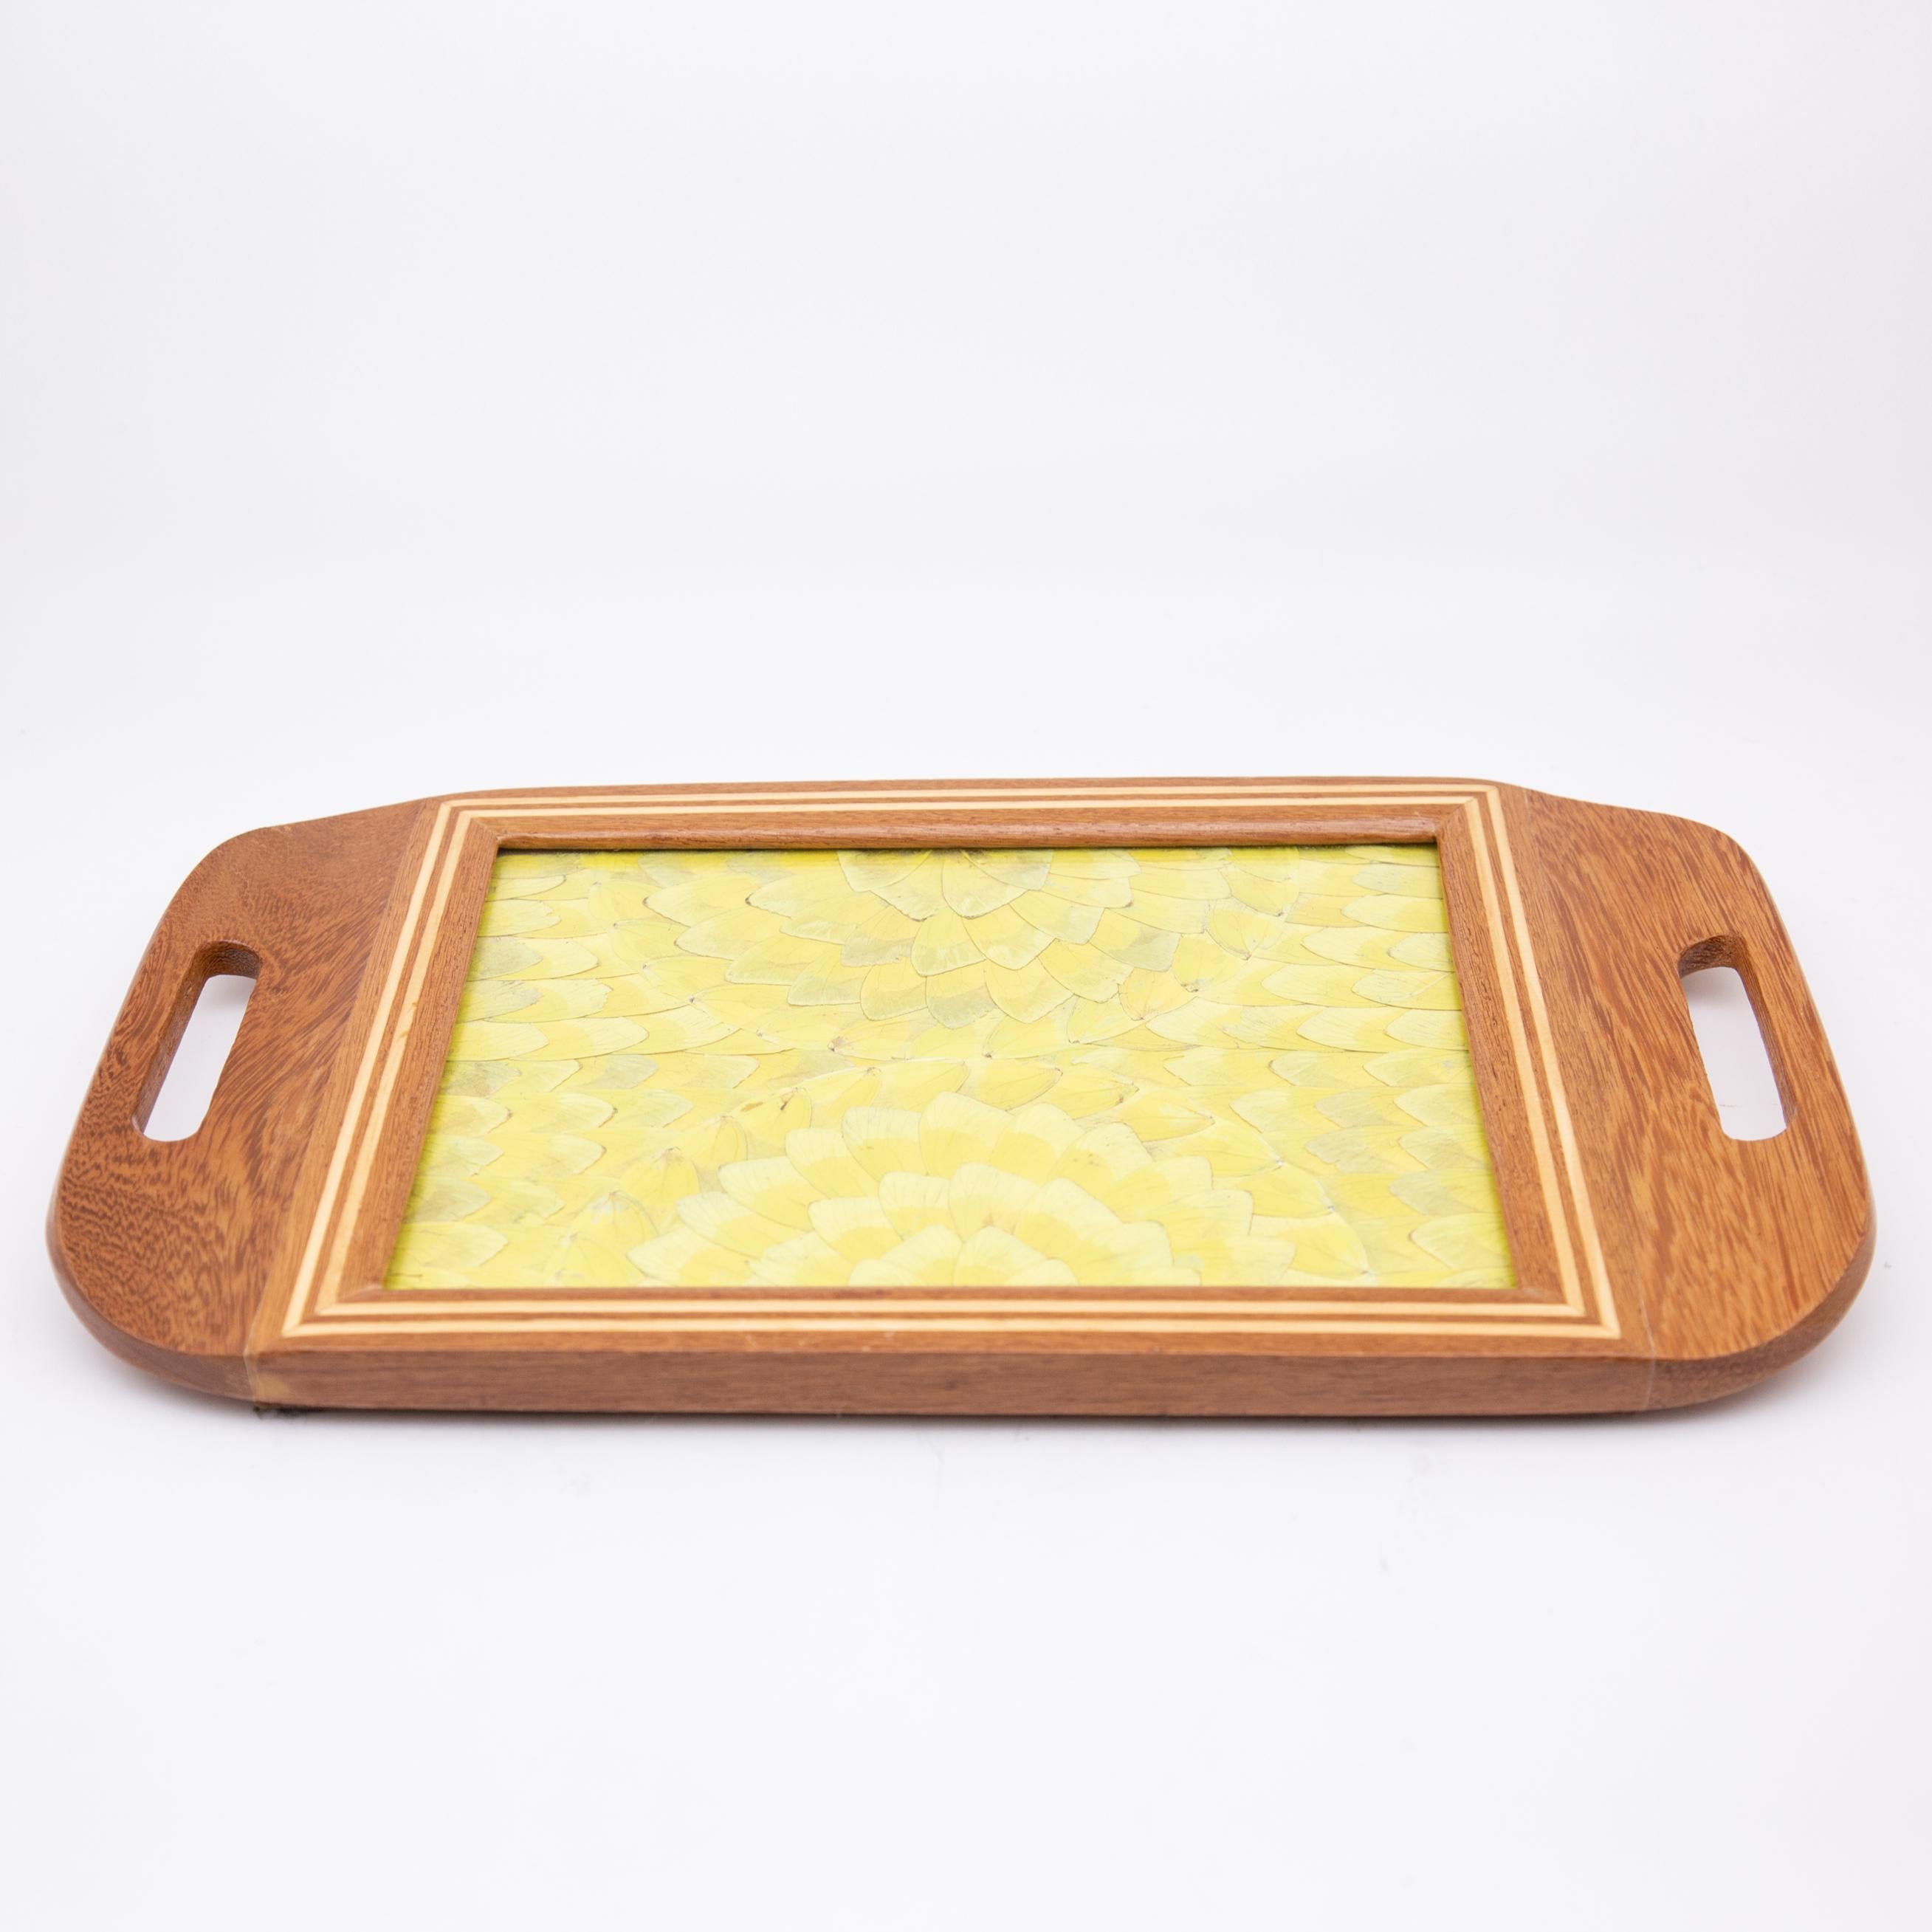 Butterfly wing tray. Handmade wooden tray with radiating yellow butterfly wings enclosed in glass.

Measures: 15